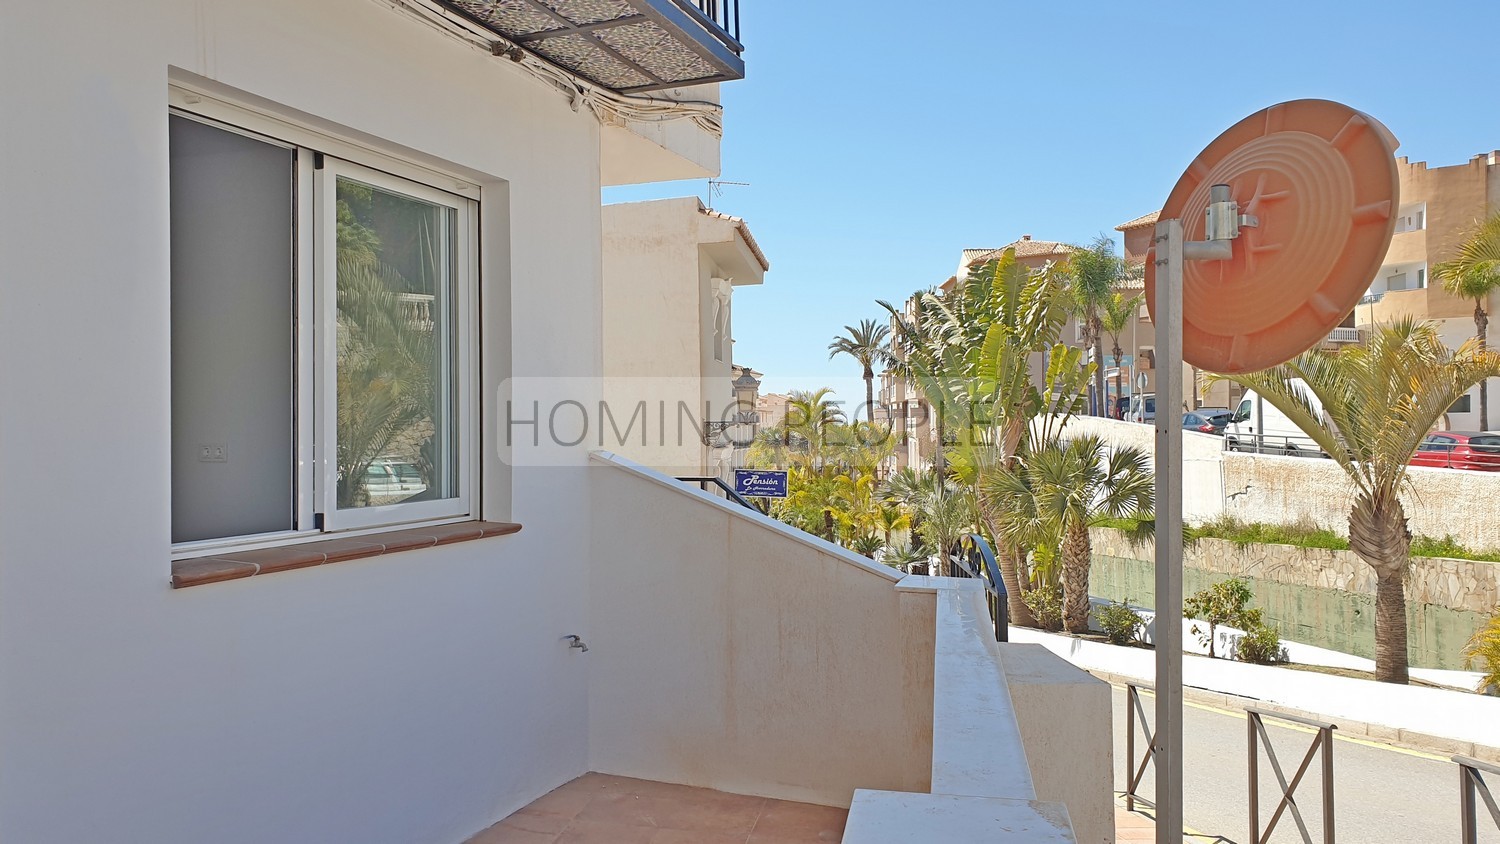 RENTED OUT. Unfurnished, brand-new, central apartment with a small terrace. Close to the beach !